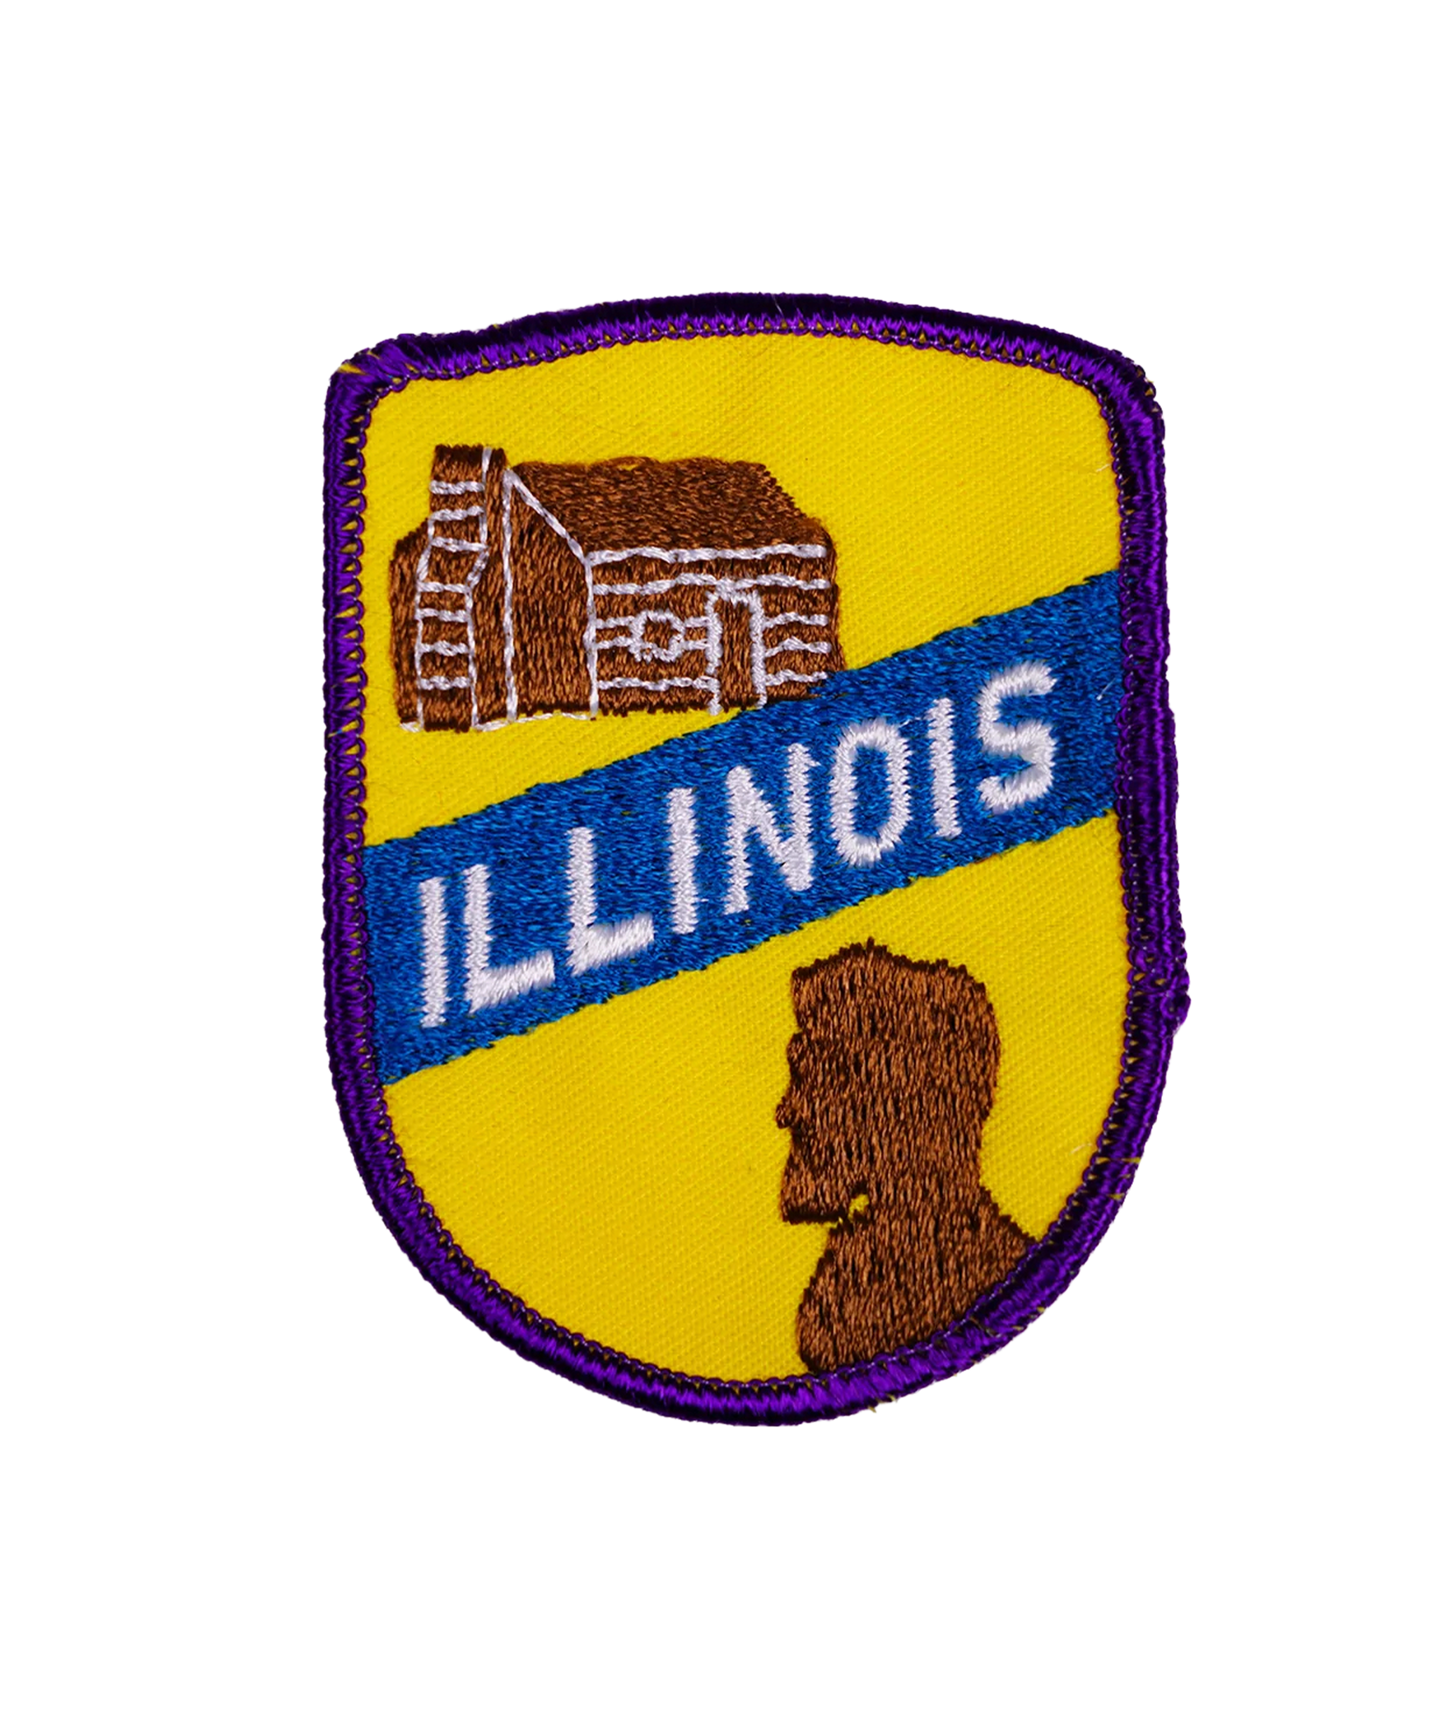 Vintage Illinois Embroidered Patch